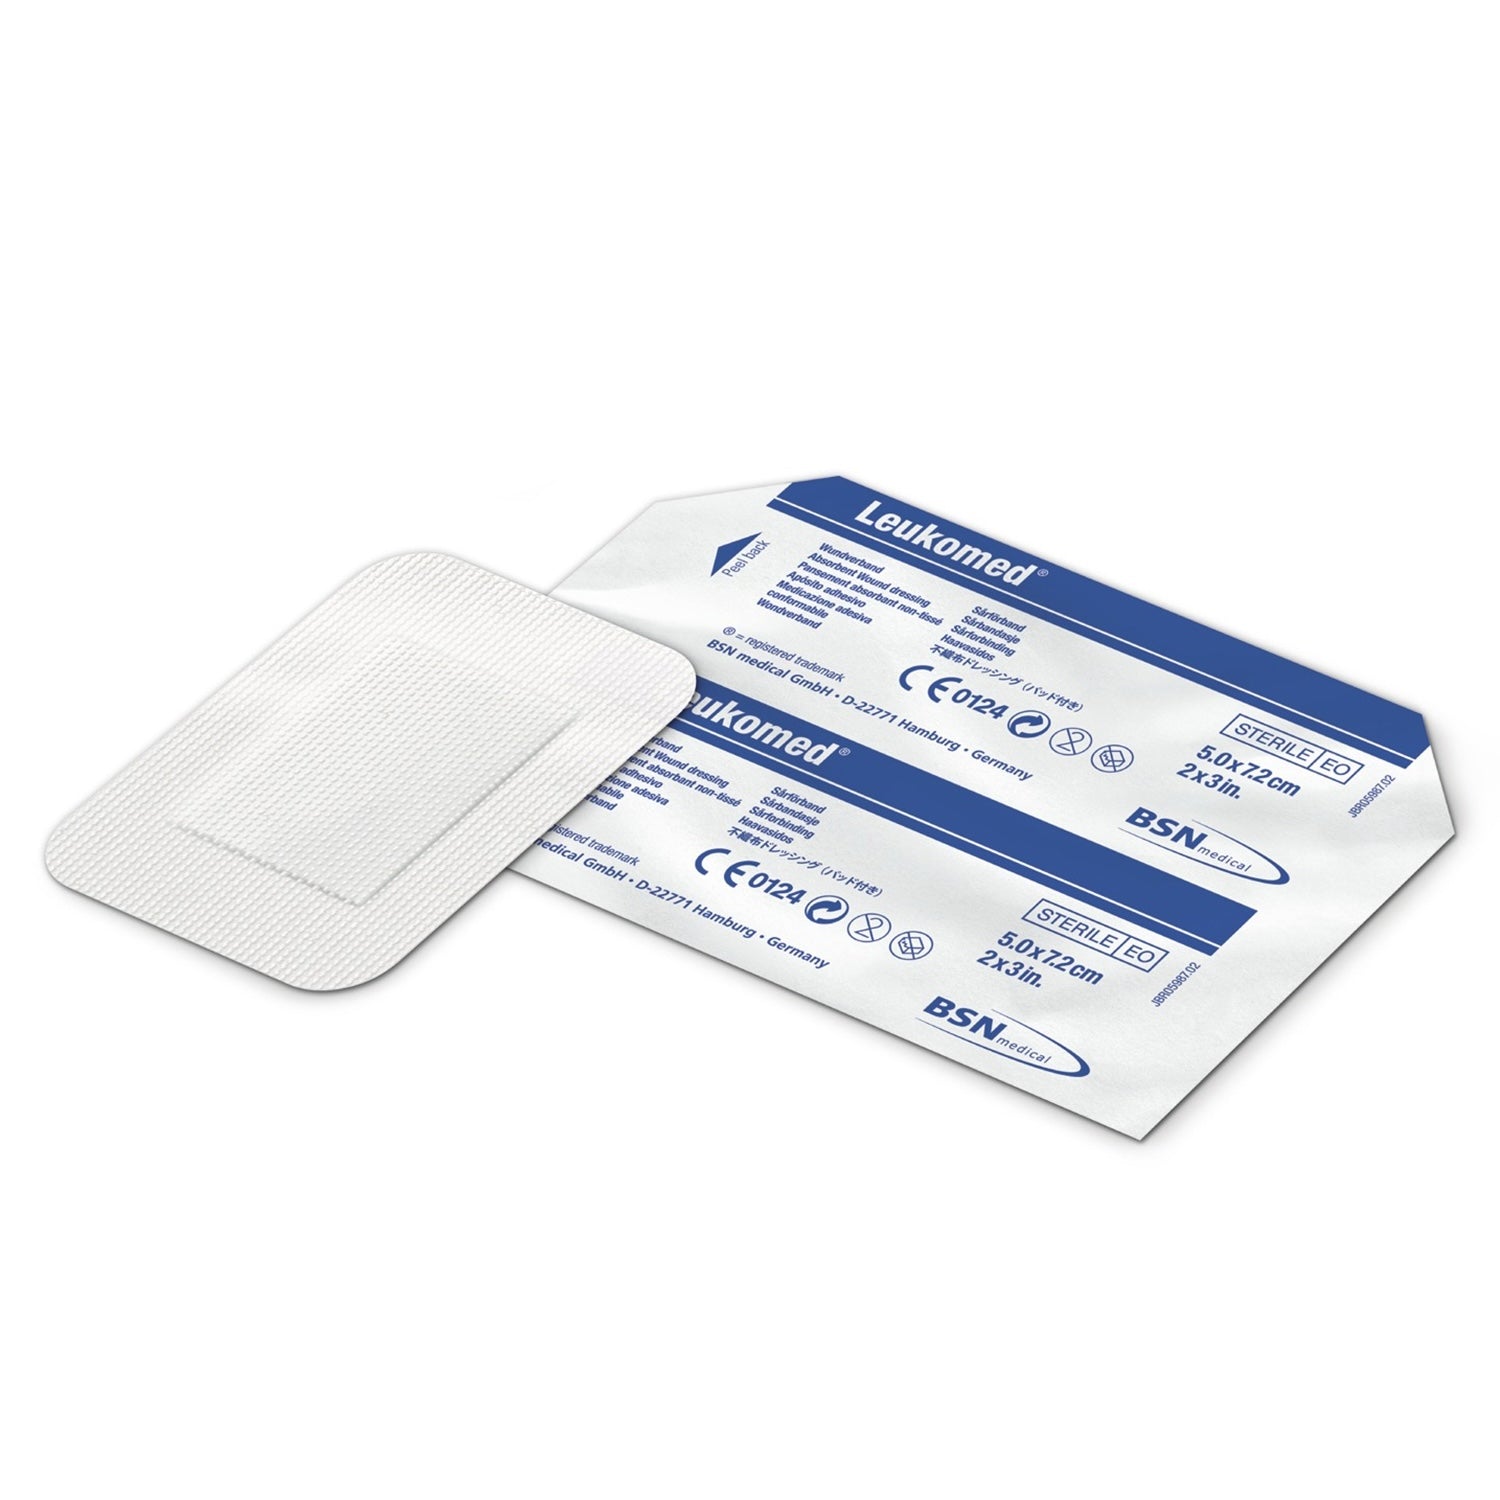 Leukomed Dressings | Non Woven Wound Dressing | 8 x 10cm | Pack of 50 (2)